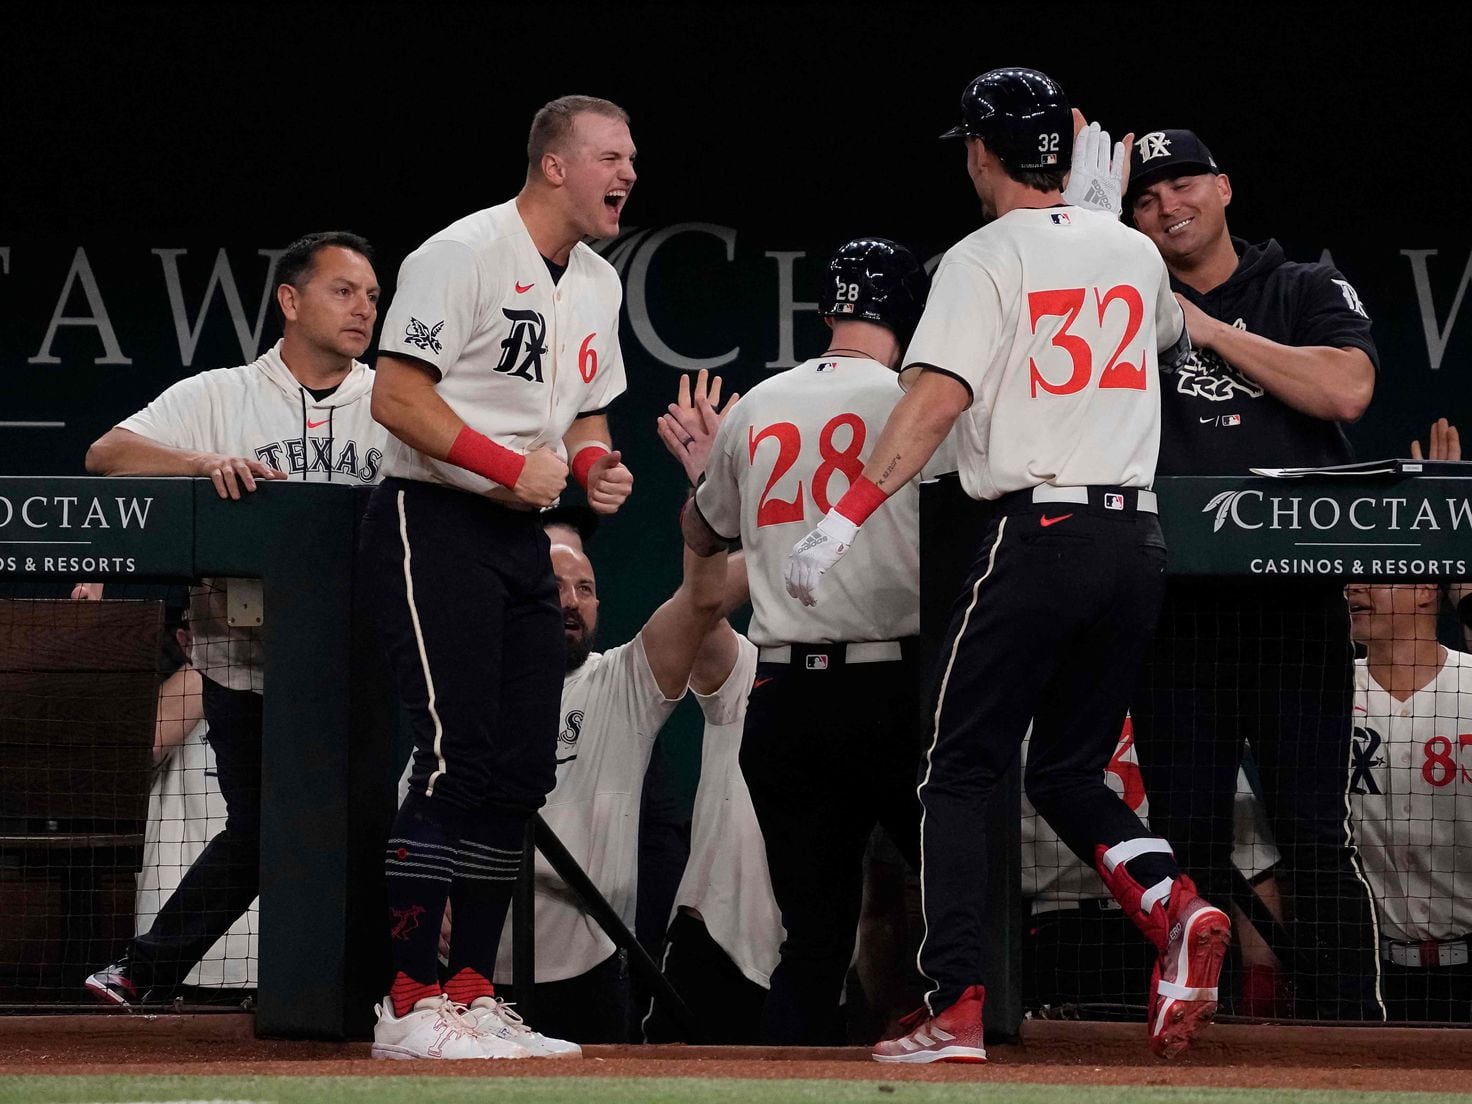 Dirt Dogs  Boston Red Sox stats, analysis, game summaries, and